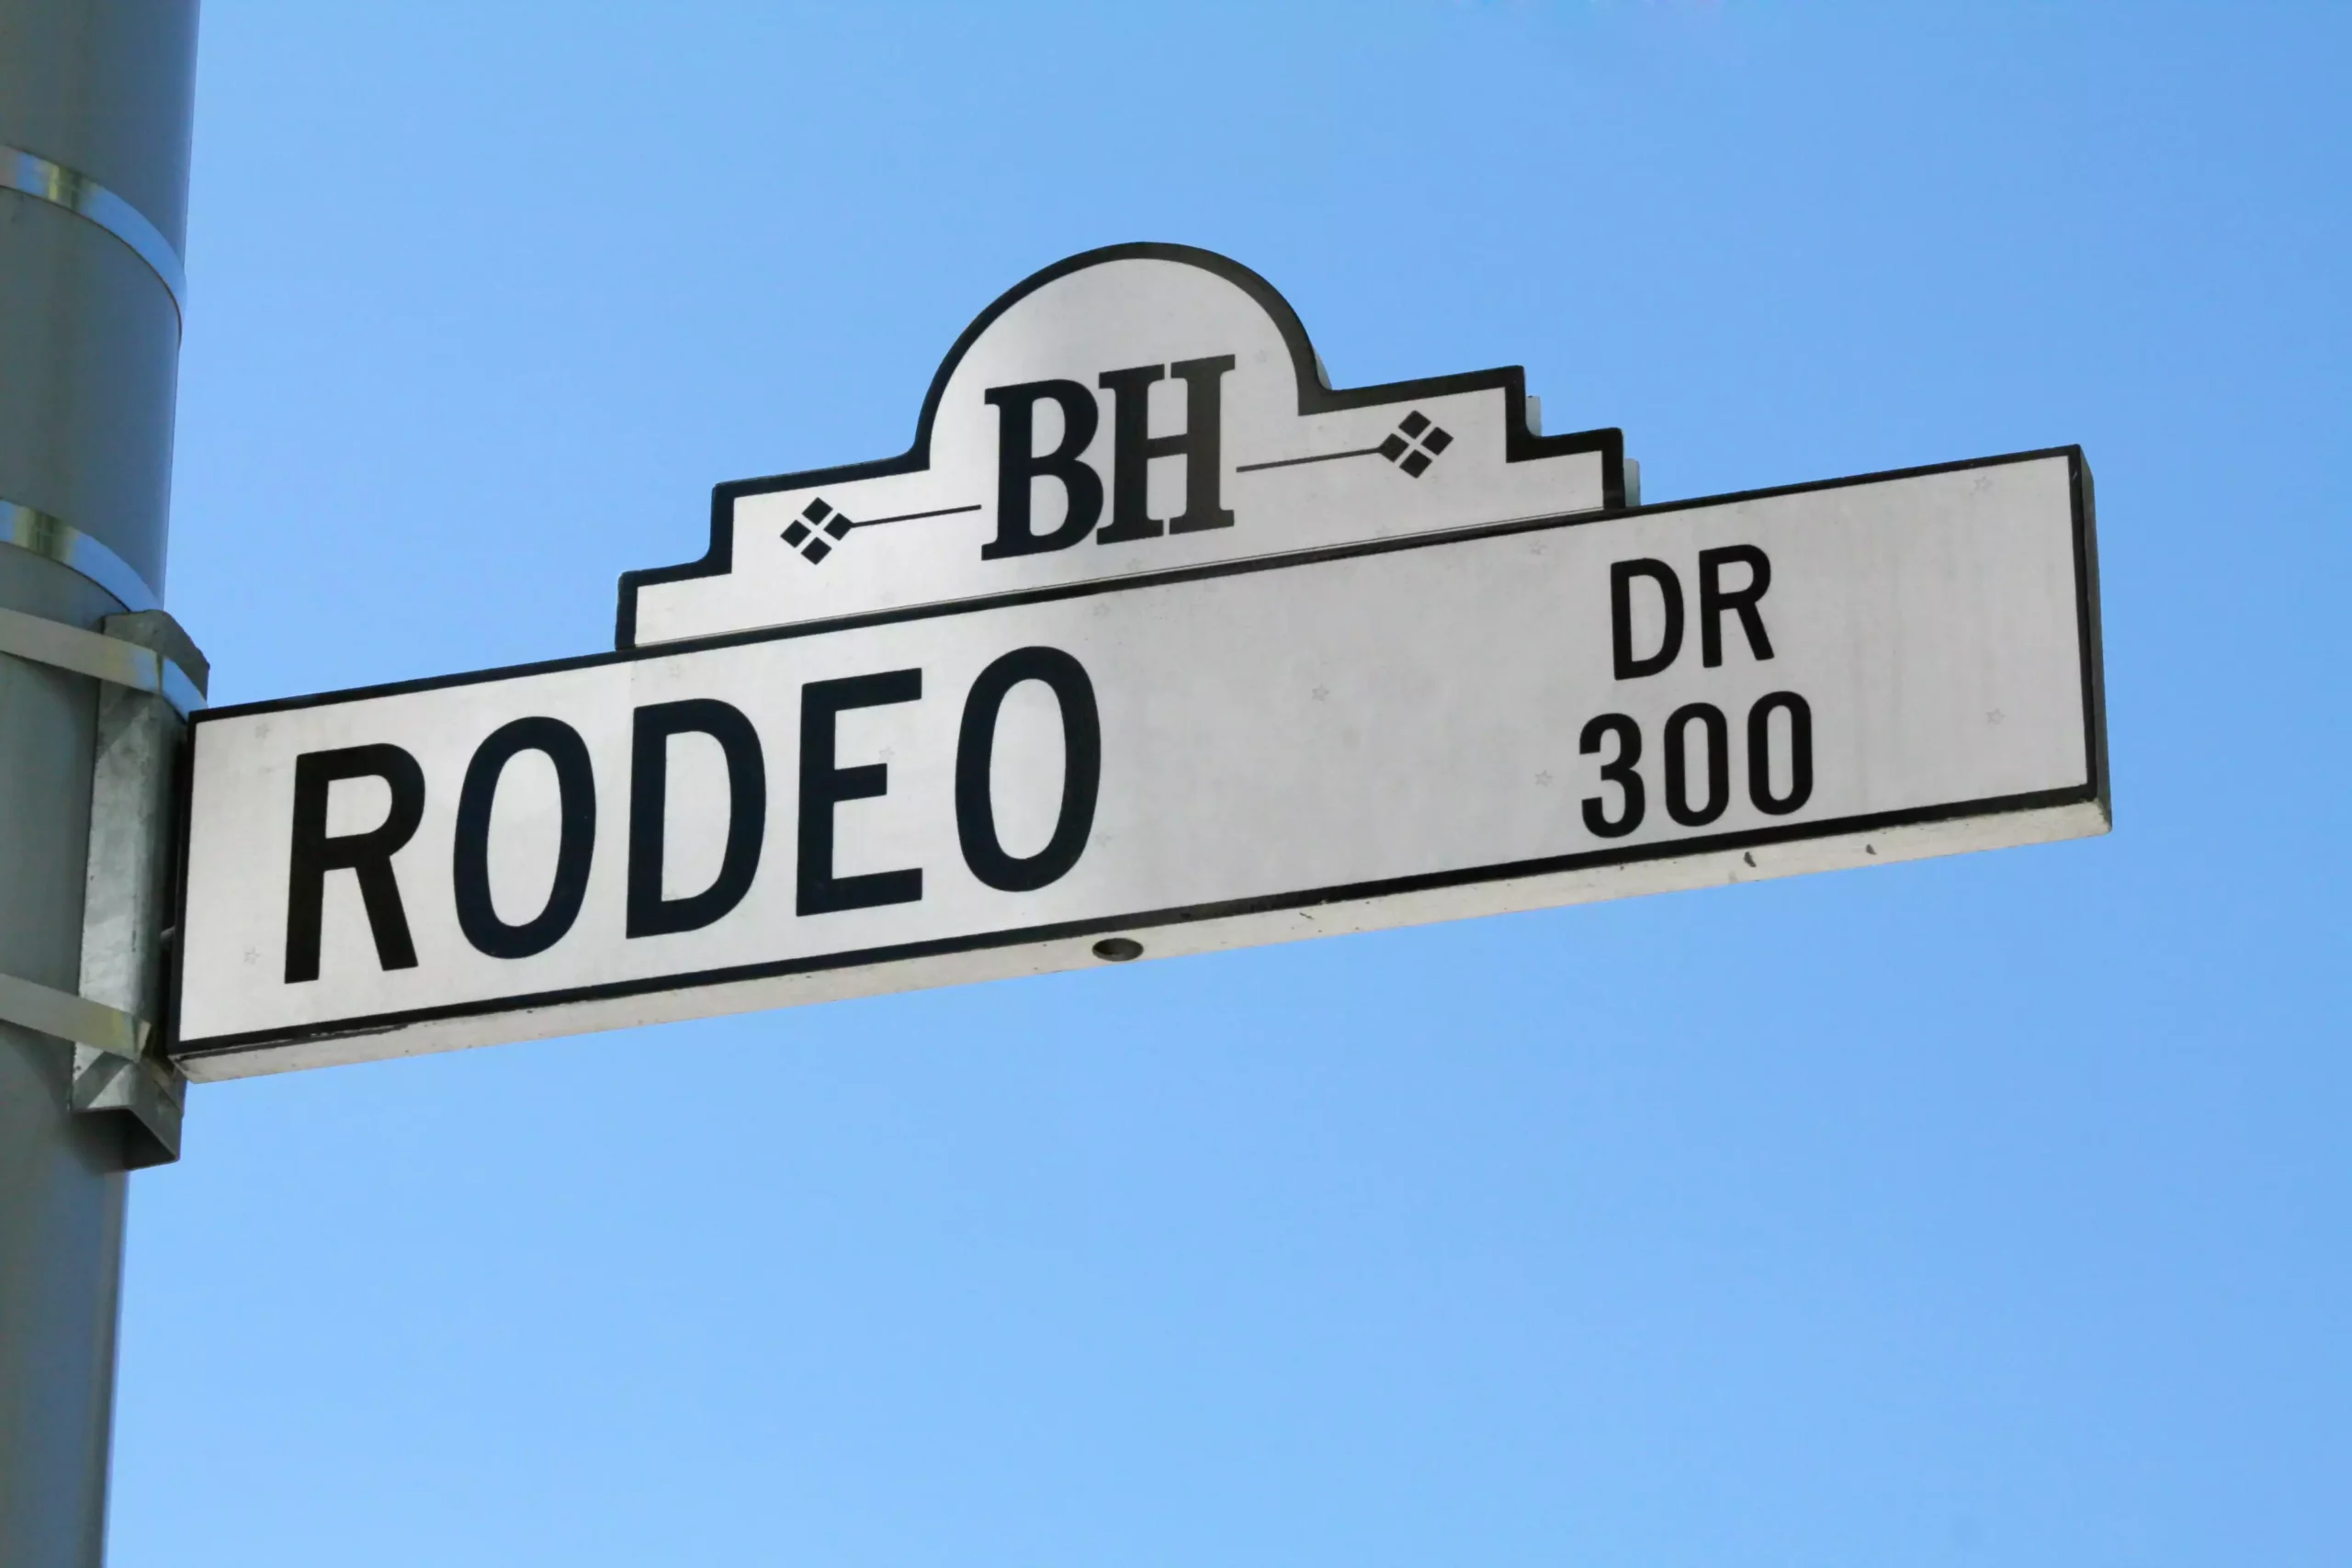 Rodeo Drive image scaled